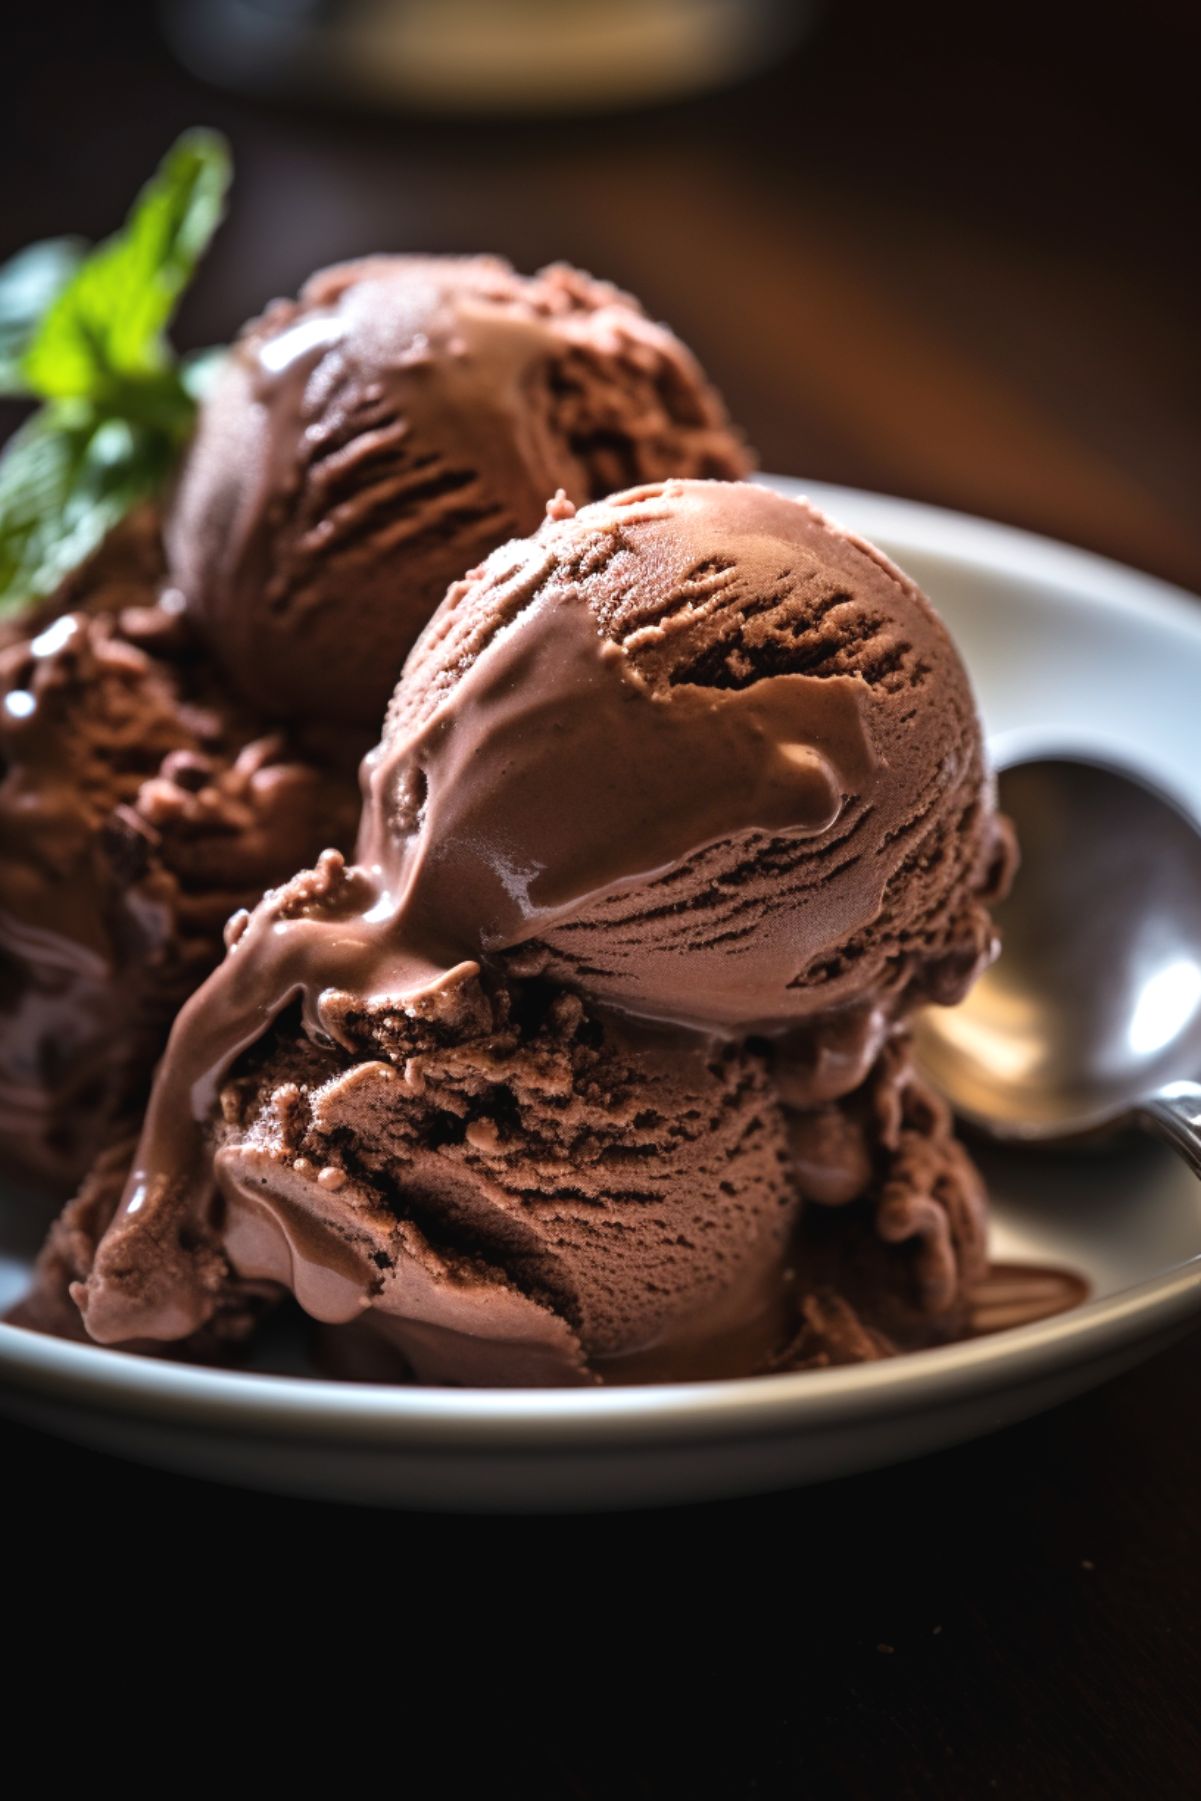 A bowl filled with scoops of chocolate custard ice cream.